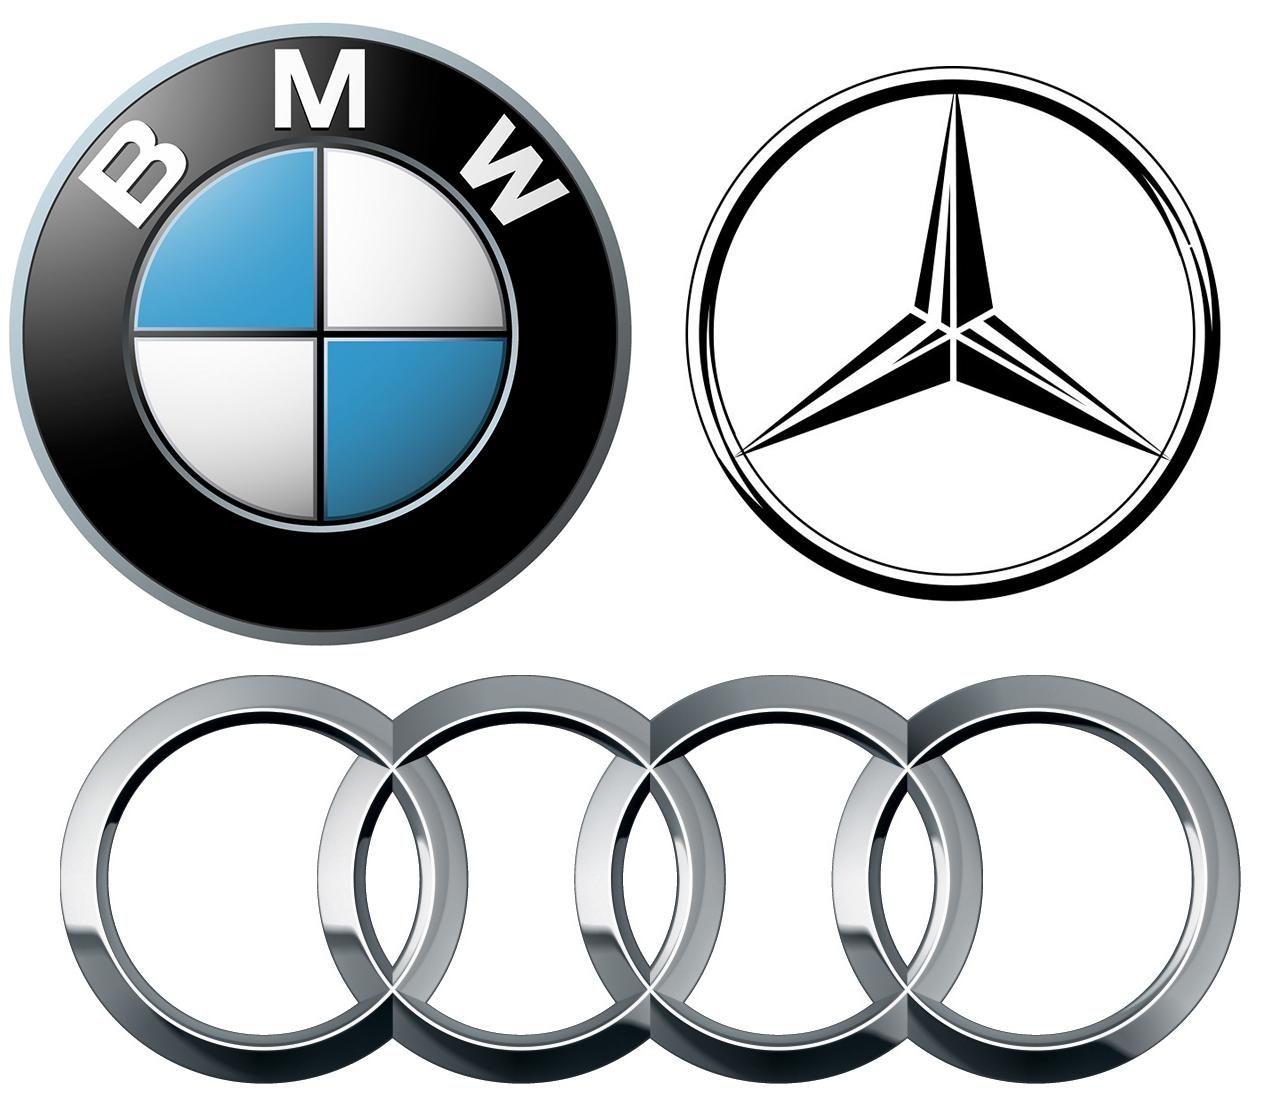 Mercedes Car Logo - Mercedes-Benz finishes ahead of Audi and BMW as world's top premium ...